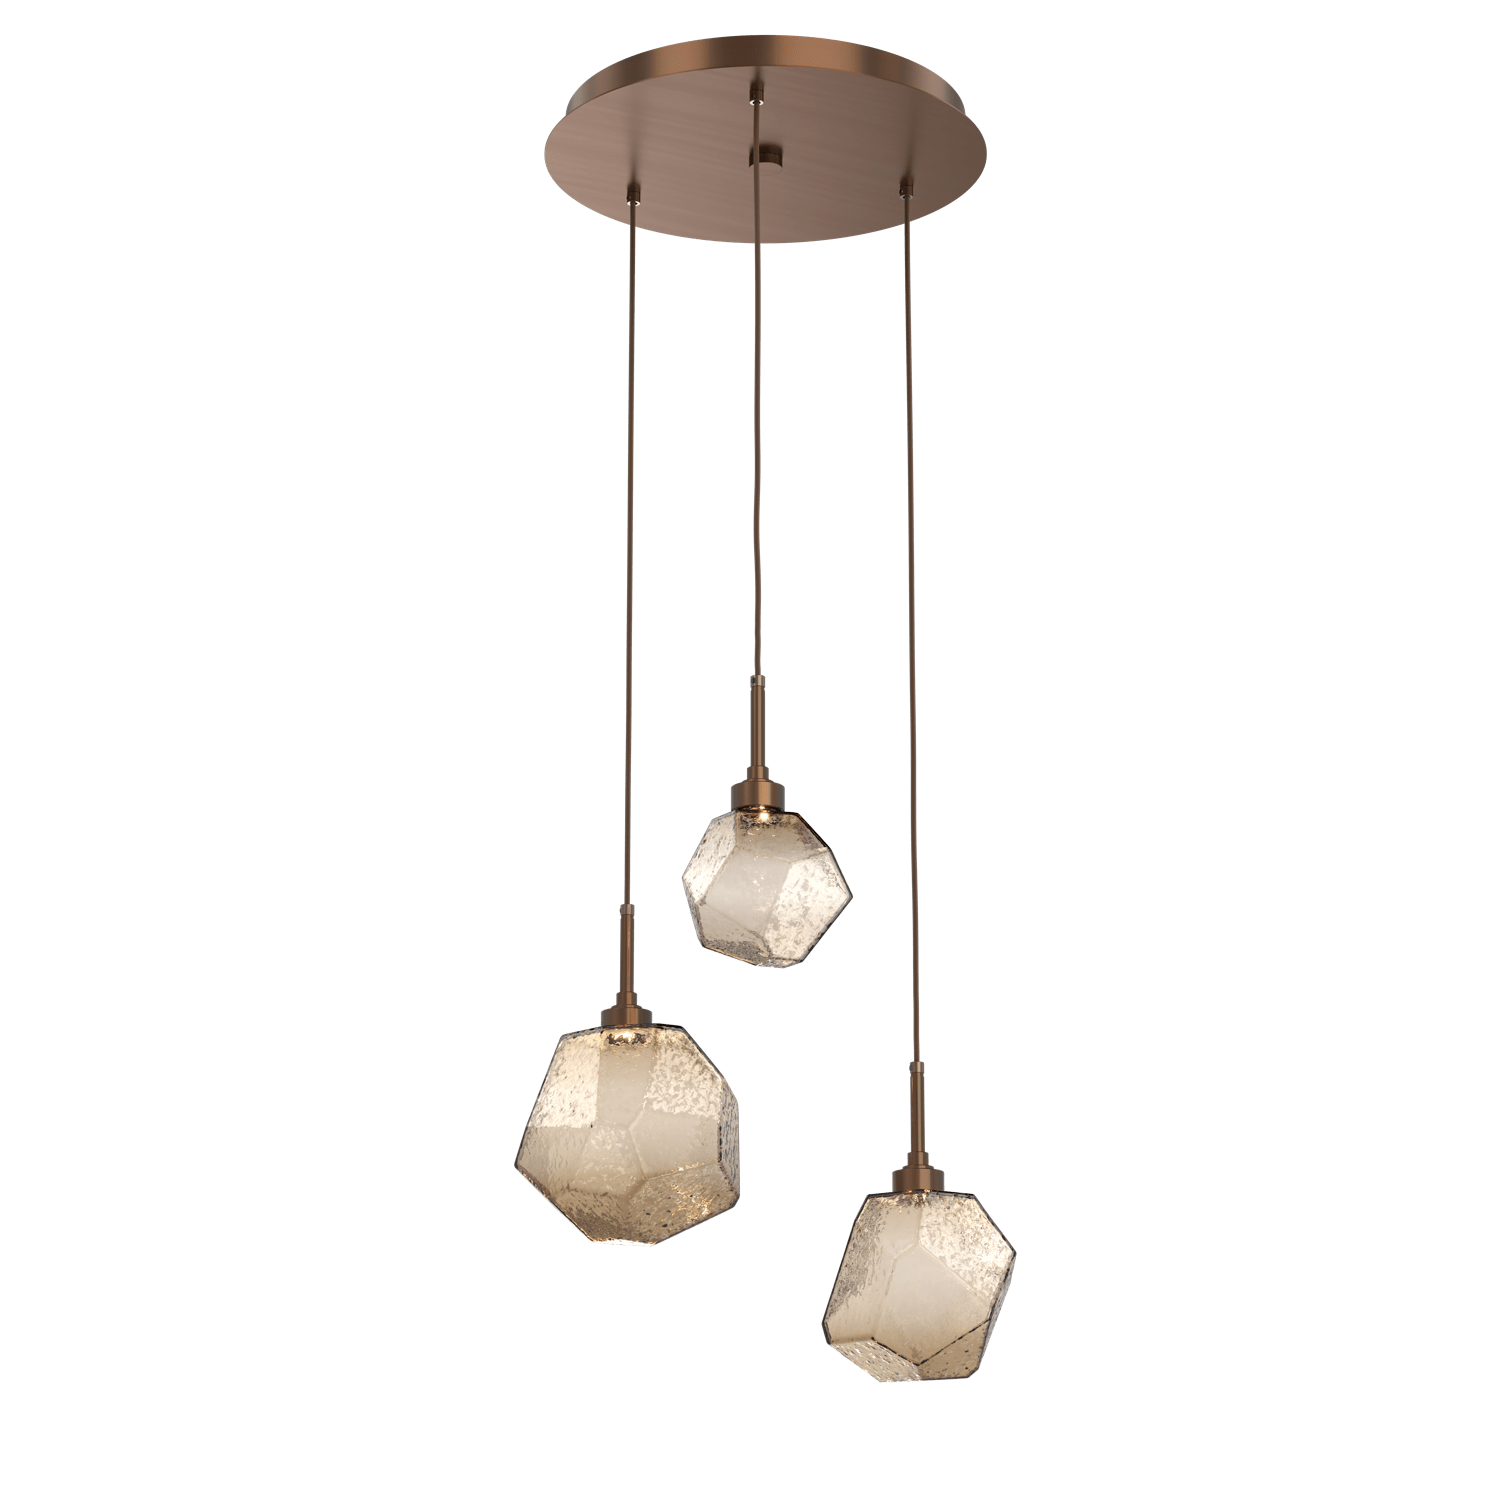 CHB0039-03-RB-B-Hammerton-Studio-Gem-3-light-round-pendant-chandelier-with-oil-rubbed-bronze-finish-and-bronze-blown-glass-shades-and-LED-lamping